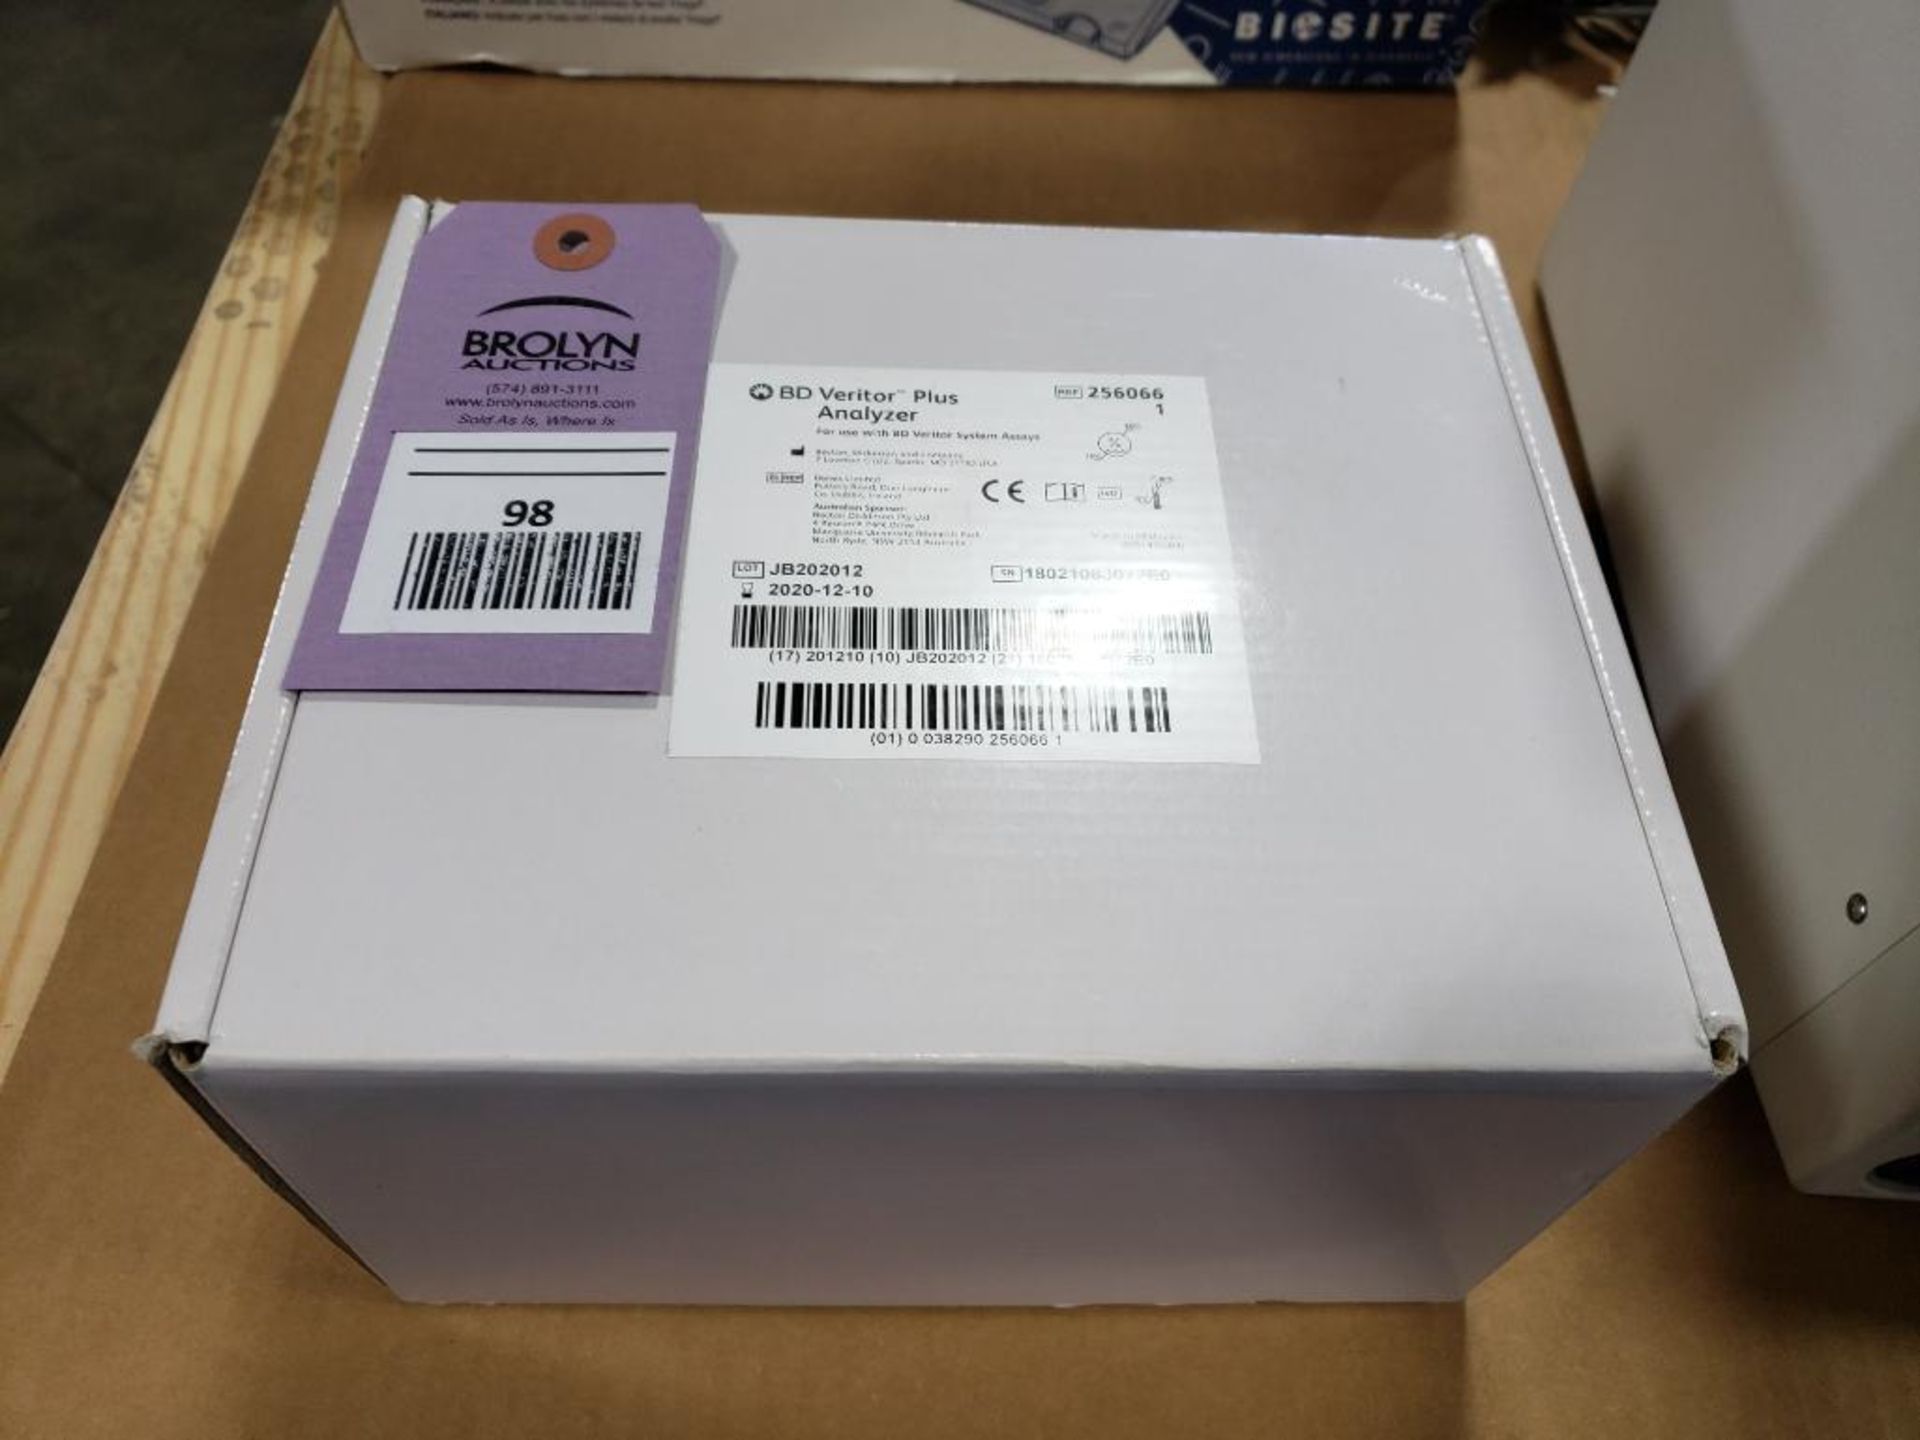 BD Veritor Plus analyzer. Appears new in box. - Image 5 of 7